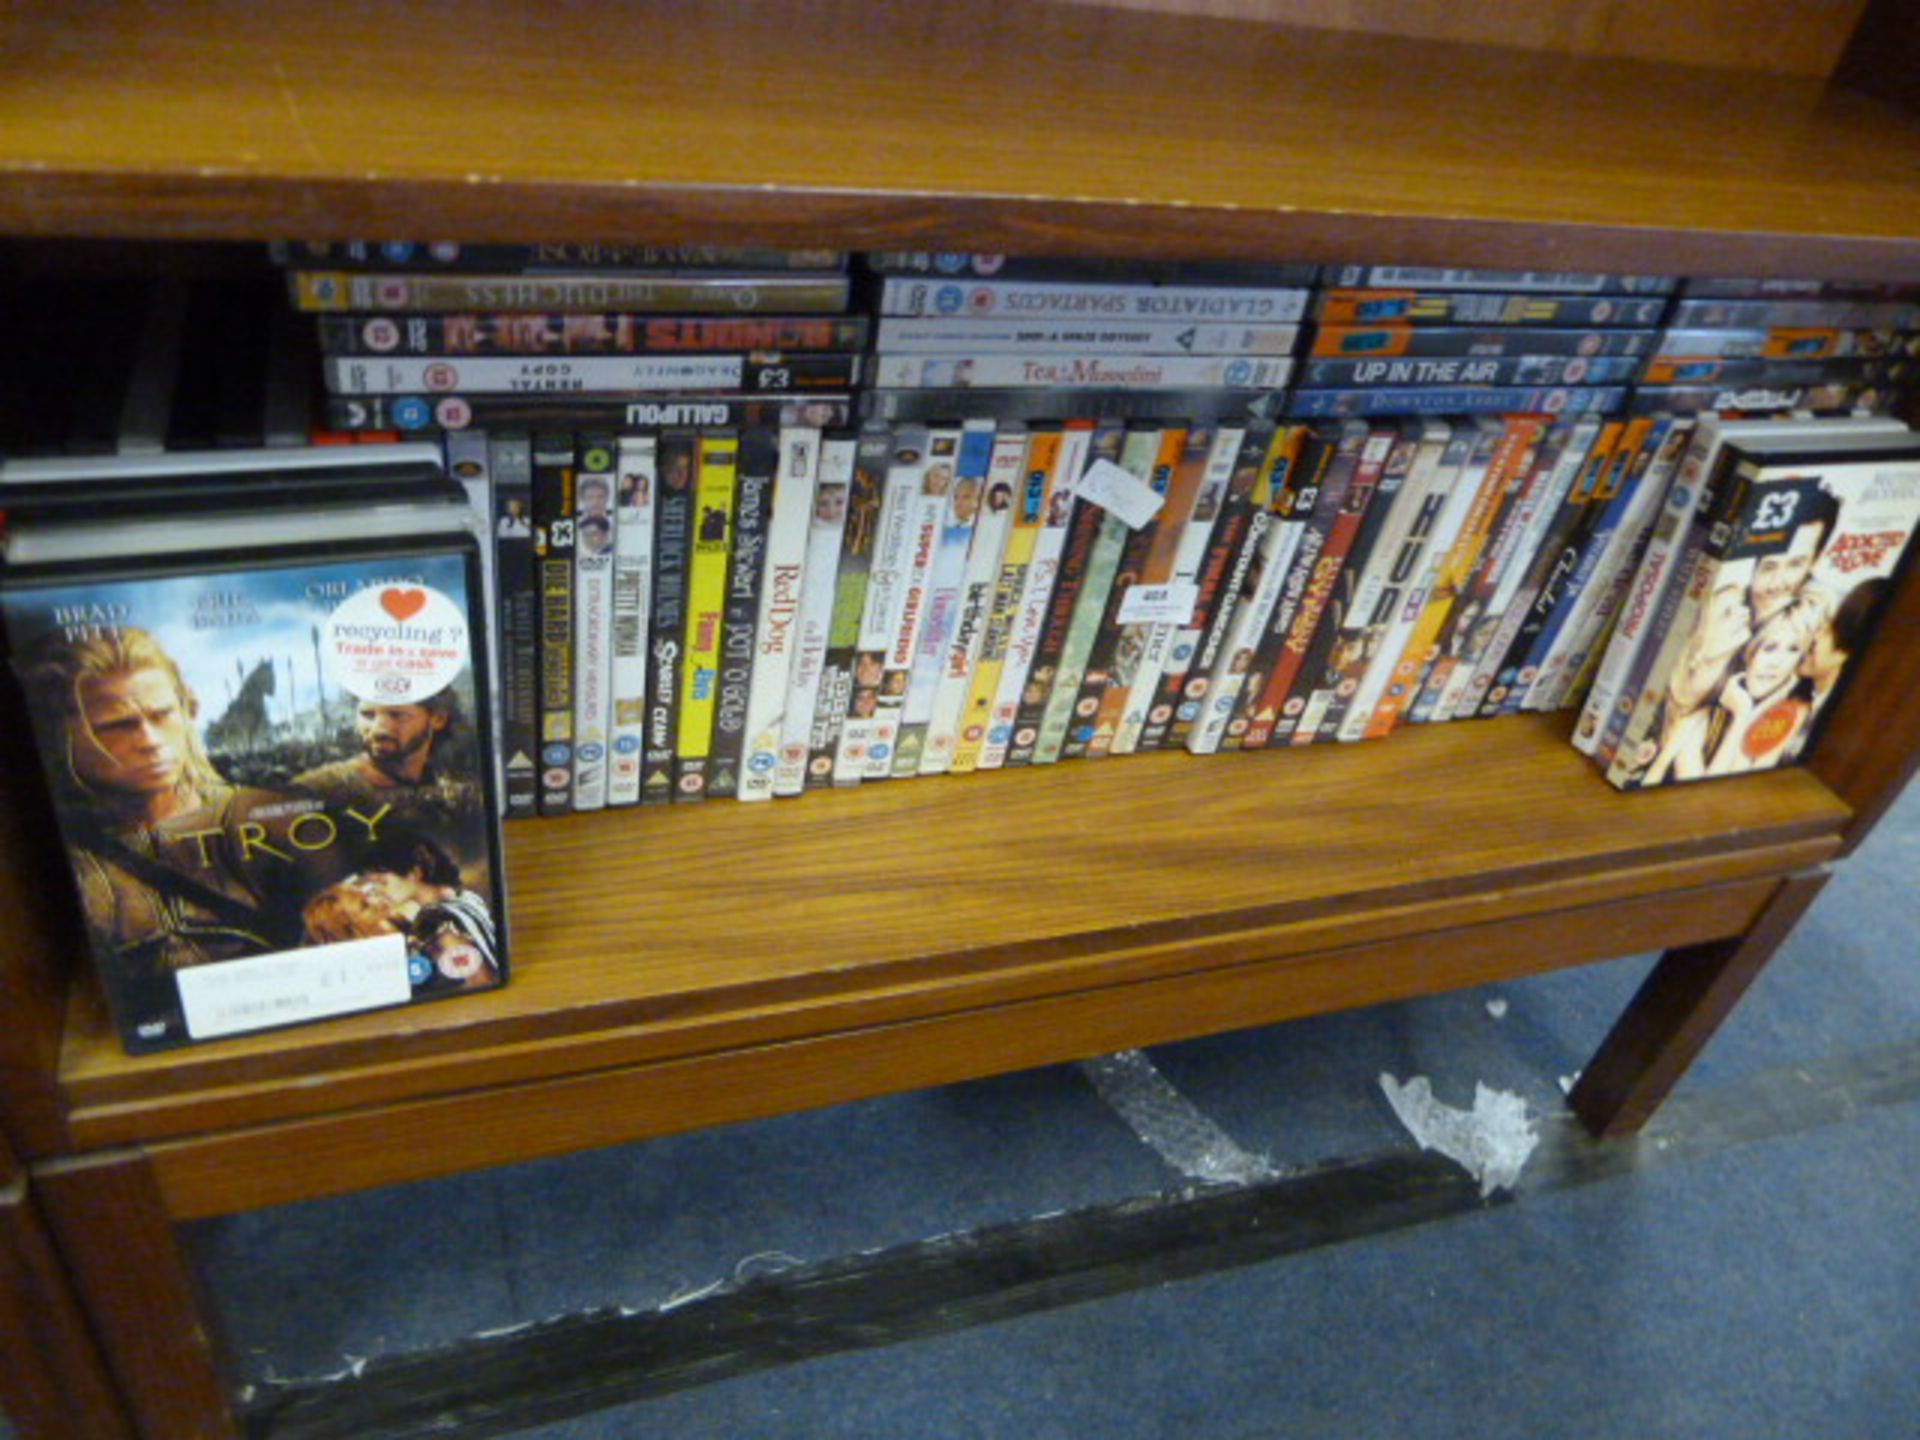 Large Quantity of DVDs